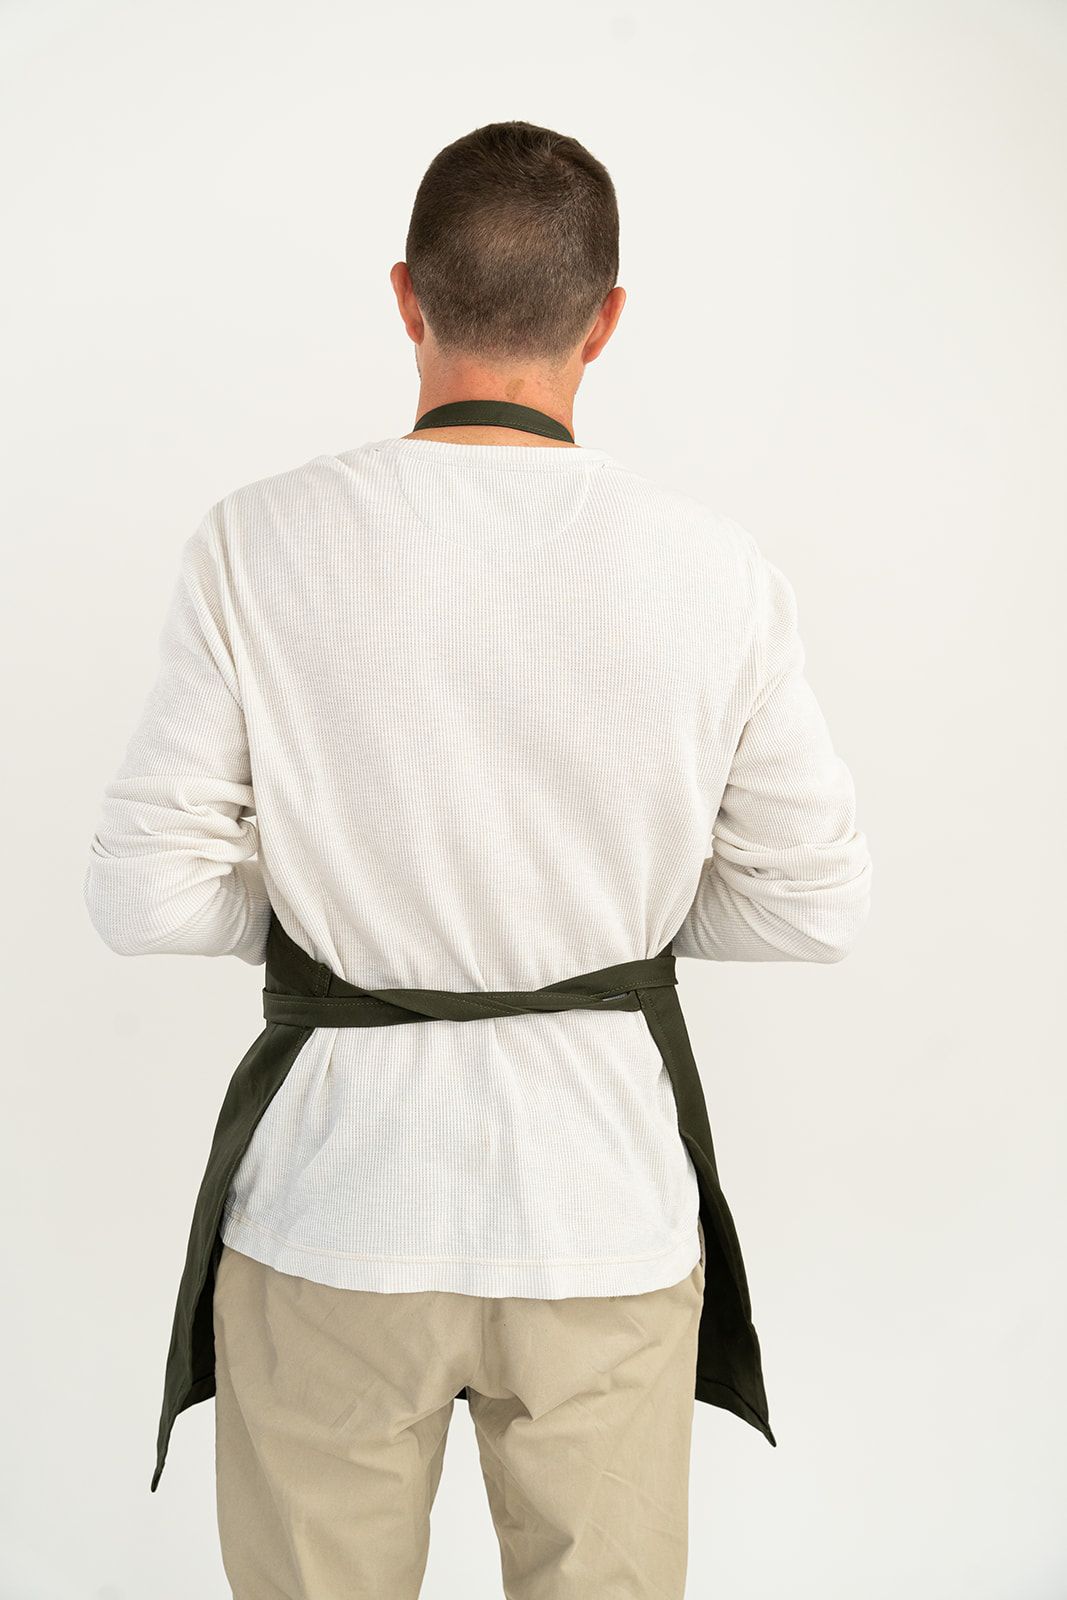 Riveter Made Apron | Fatigue + Brown Leather